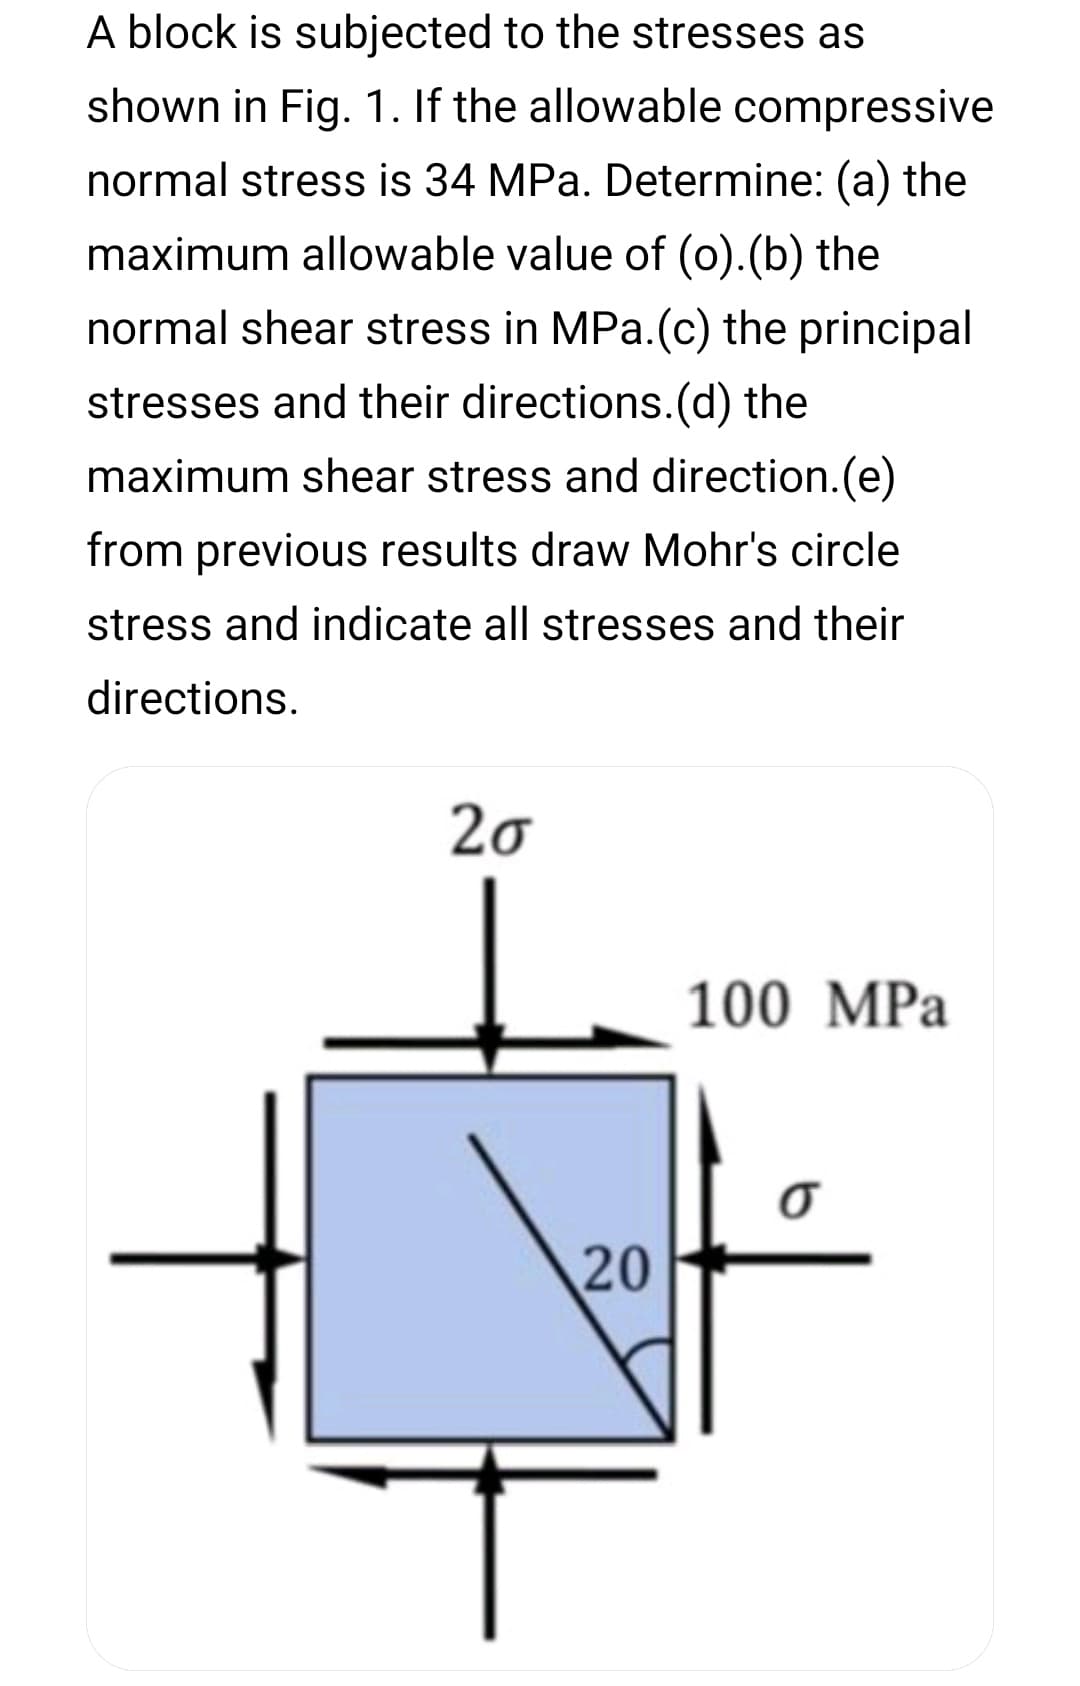 A block is subjected to the stresses as
shown in Fig. 1. If the allowable compressive
normal stress is 34 MPa. Determine: (a) the
maximum allowable value of (o).(b) the
normal shear stress in MPa.(c) the principal
stresses and their directions.(d) the
maximum shear stress and direction.(e)
from previous results draw Mohr's circle
stress and indicate all stresses and their
directions.
20
100 MPa
20
